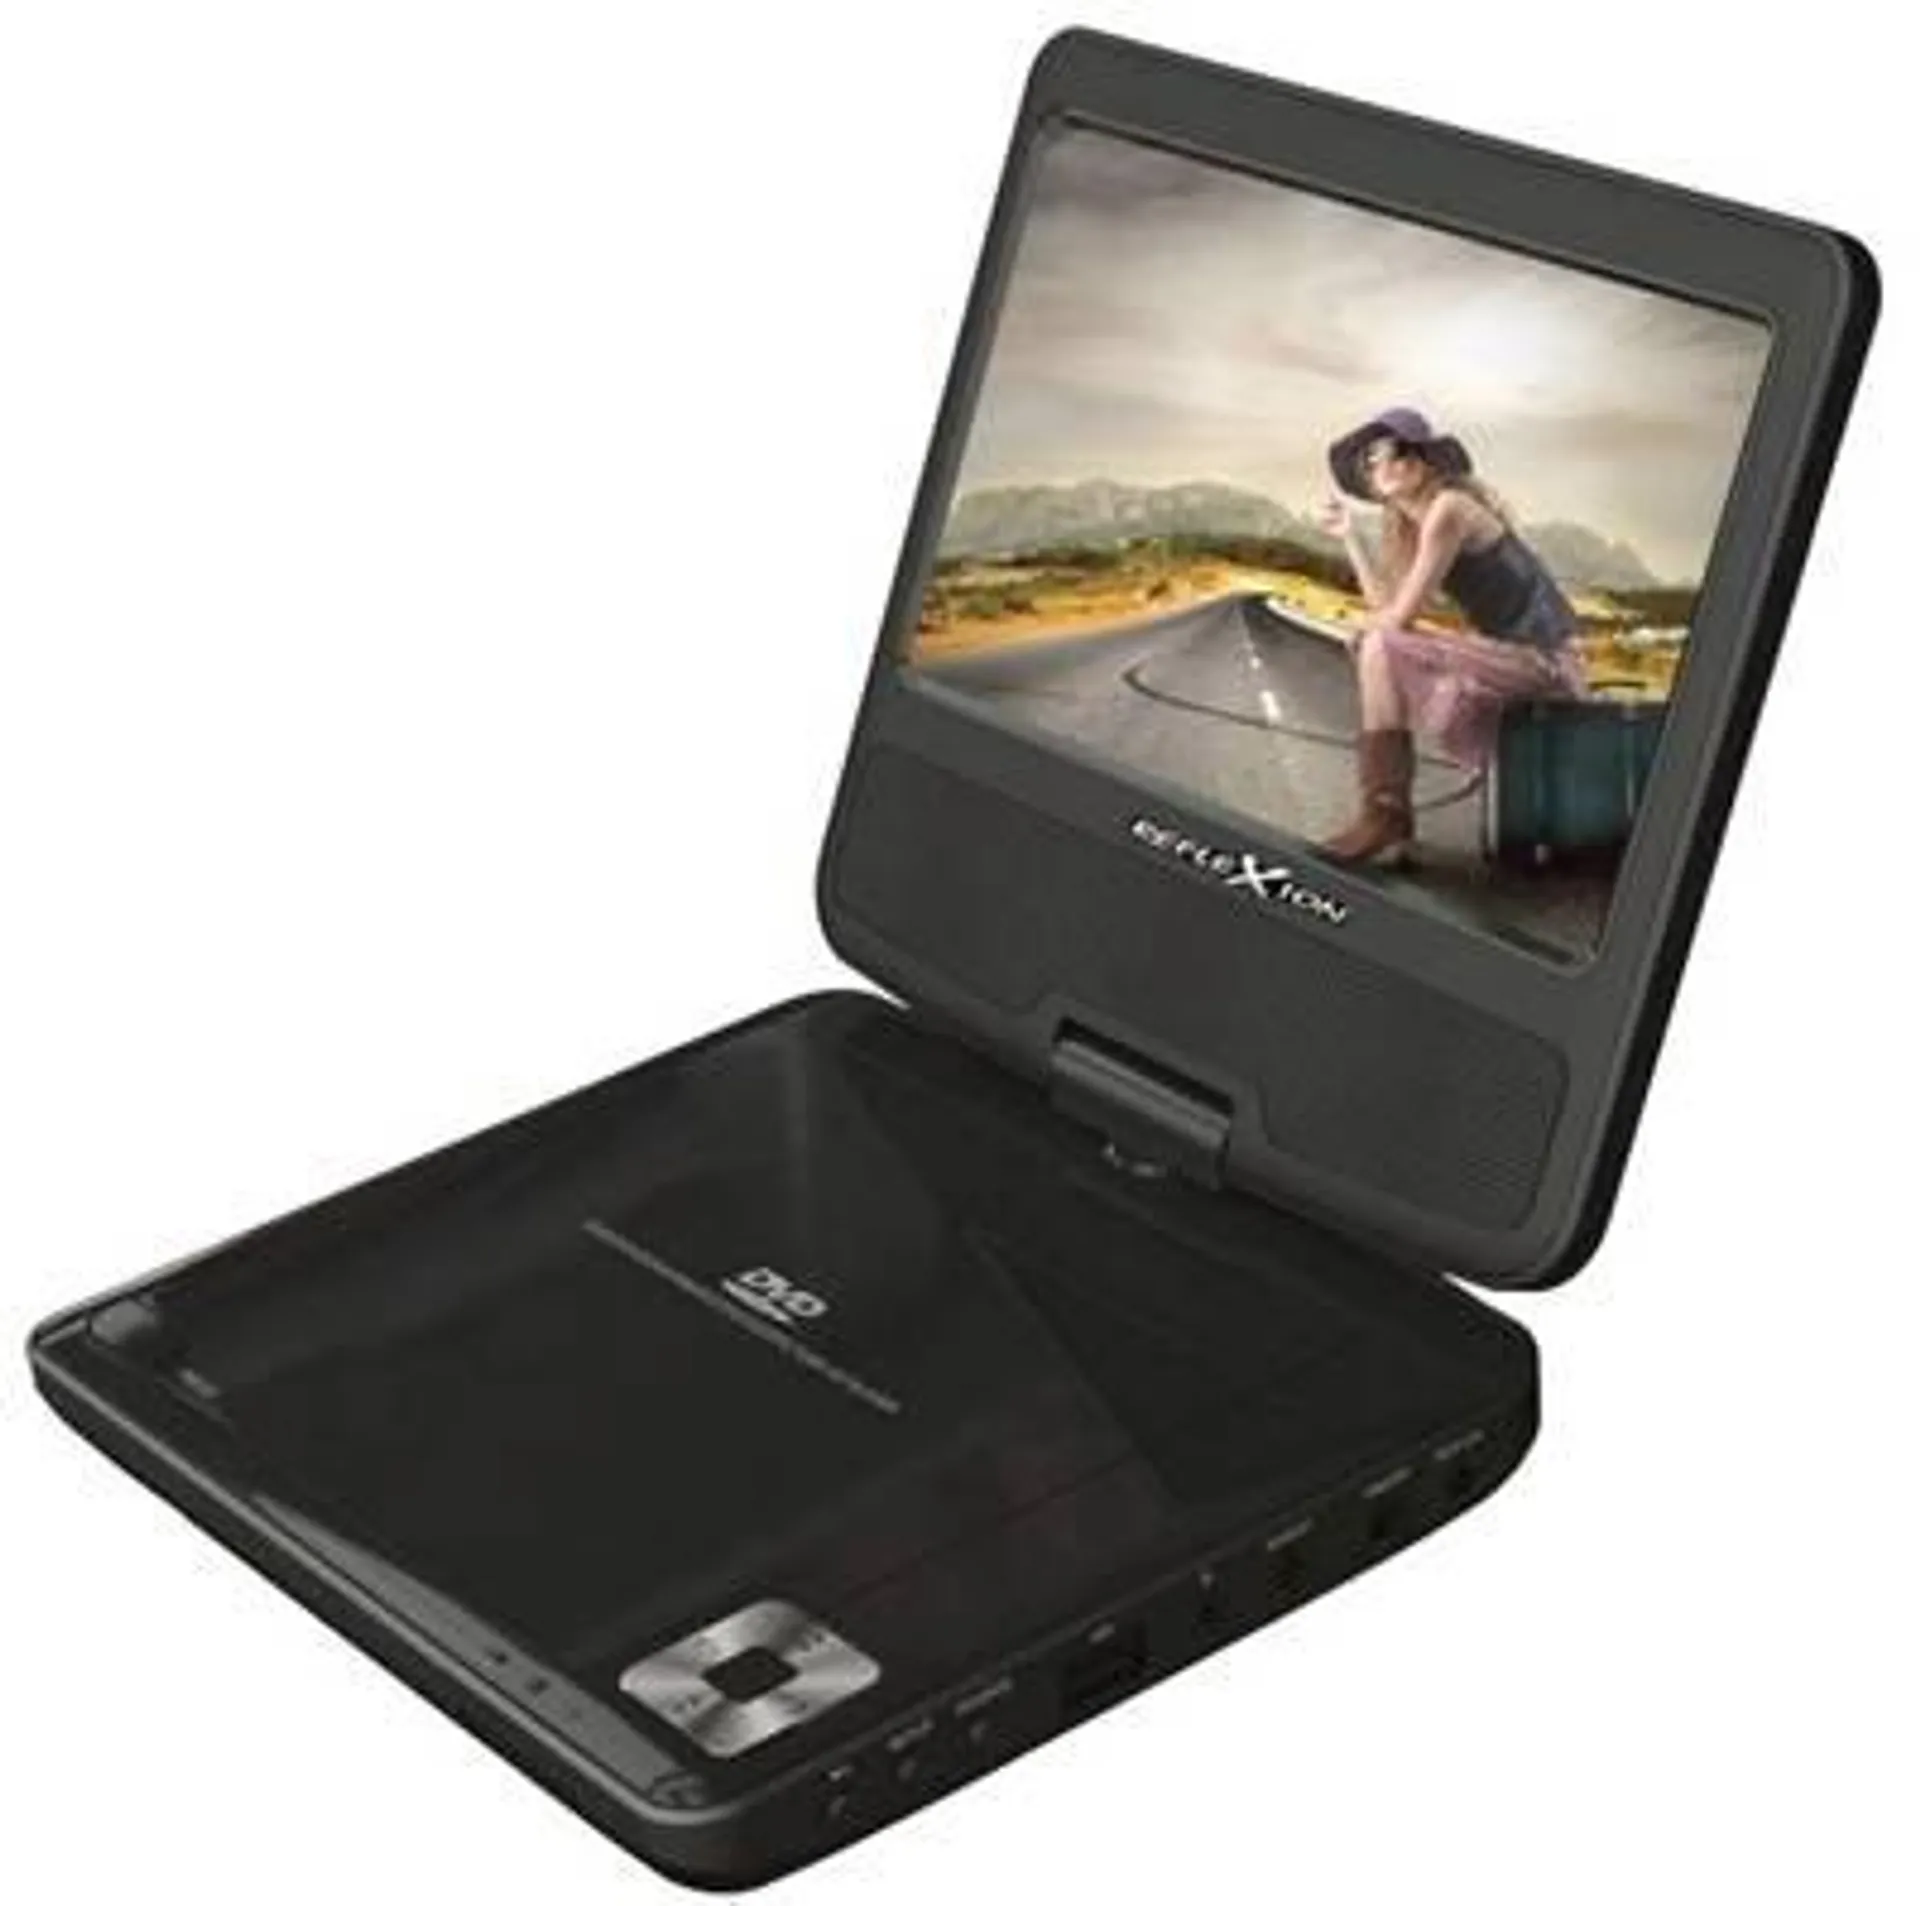 Reflexion DVD7002 Portable DVD player 17.78 cm 7 inch built-in DVD player, Battery-powered, incl. 12V car power cable B